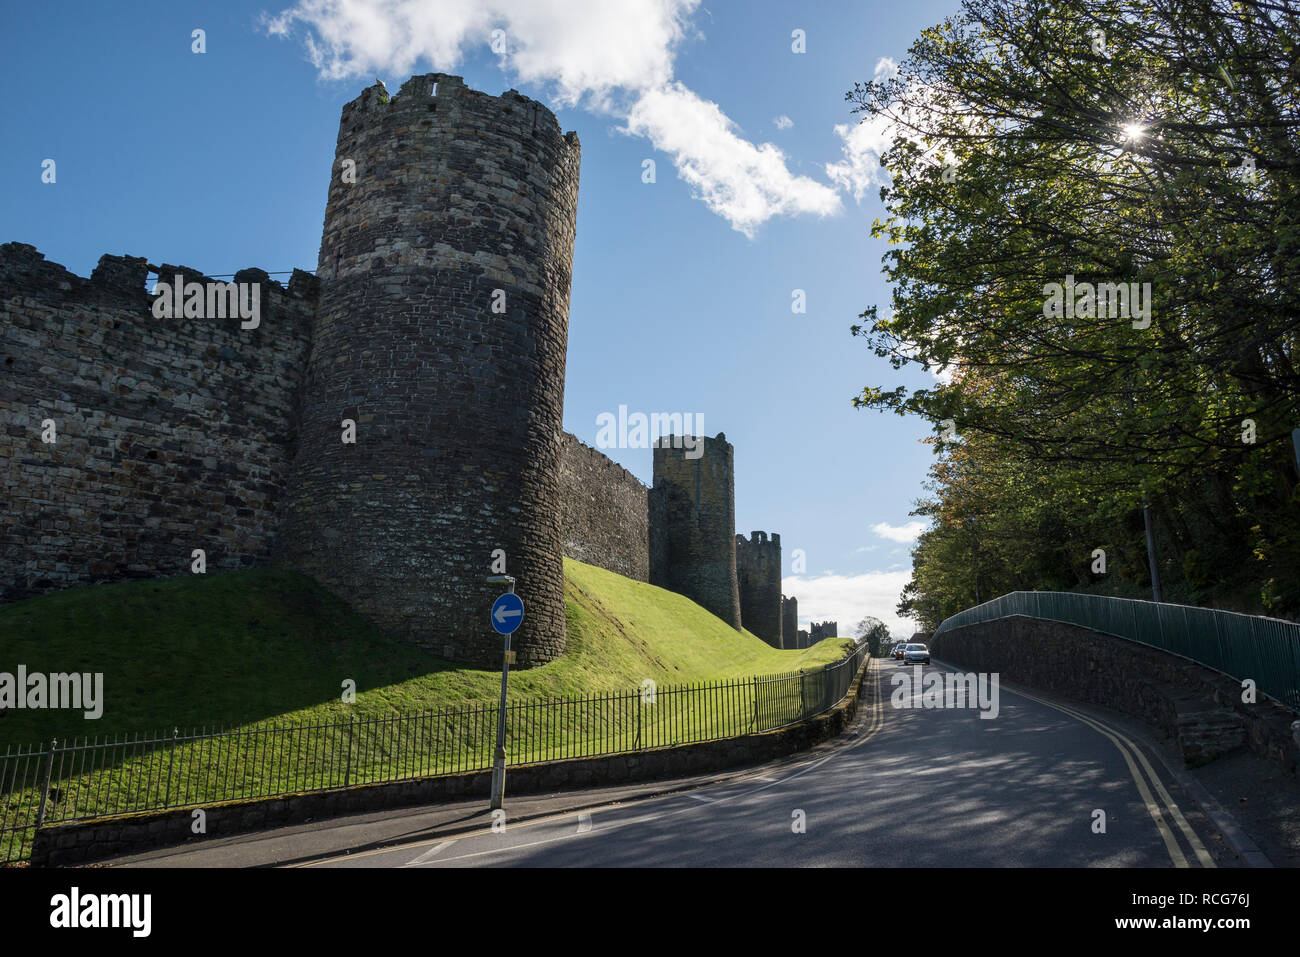 Outside the old town walls in the historic town of Conwy in North Wales. Stock Photo